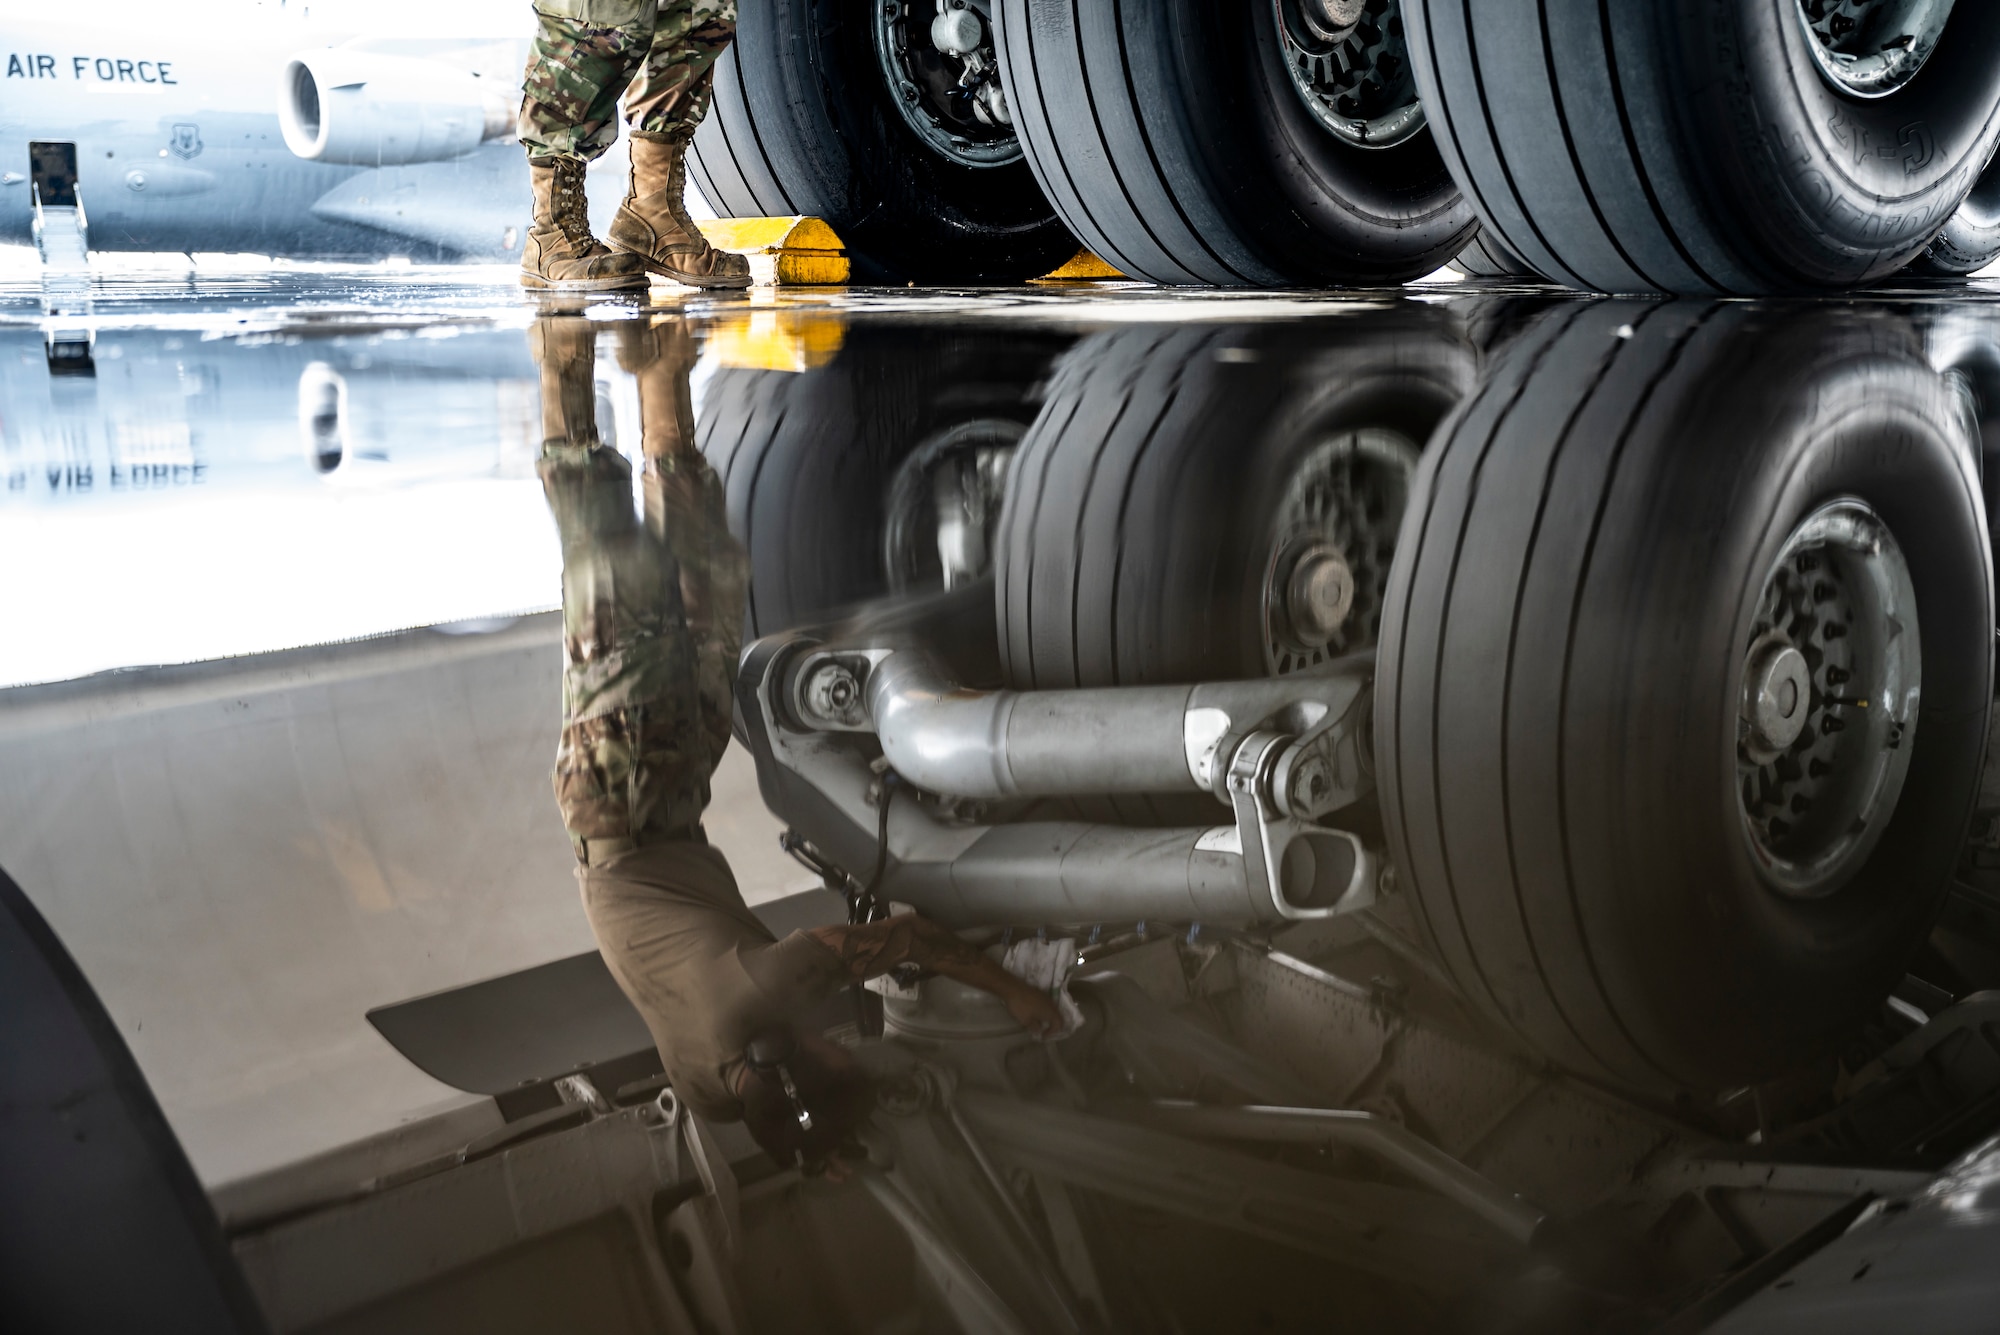 Senior Airman Clayton Roppa, 911th Aircraft Maintenance Squadron crew chief, wipes down the landing gear of a C-17 Globemaster III at the Pittsburgh International Airport Air Reserve Station, Pennsylvania, Aug. 16, 2021. Airmen routinely wipe down a variety of parts of the aircraft to help prevent corrosion.